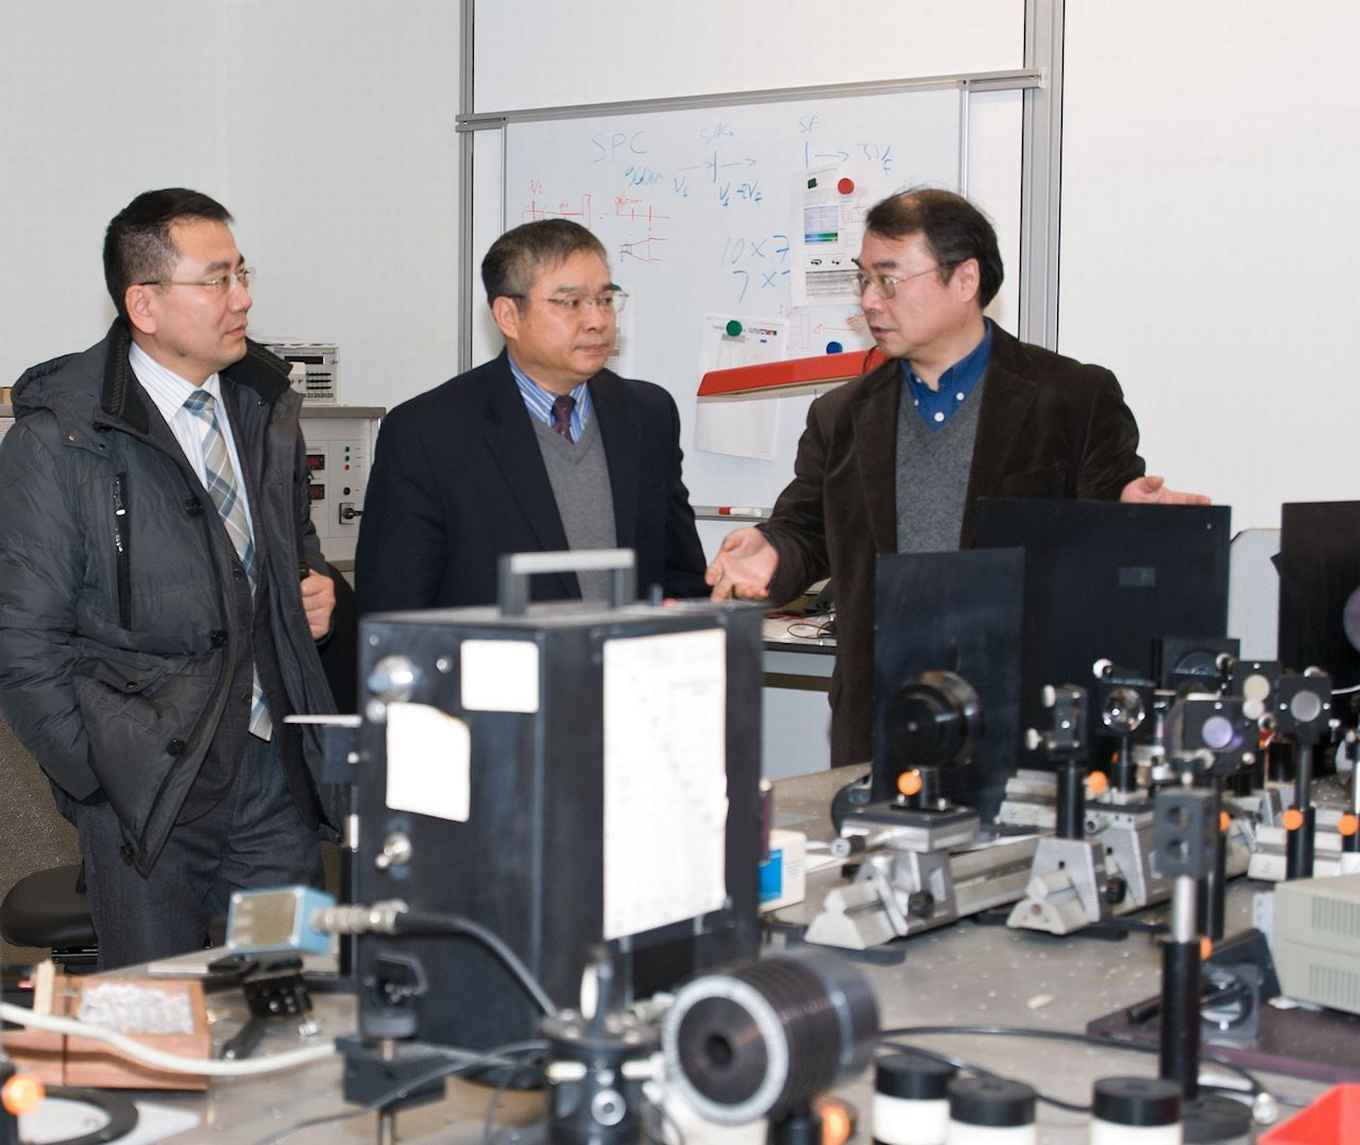 Prof. Jinhua Cao (center) visiting the HIMS laboratories. On the left Mr. Bo Quan from the Chinese embassy, on the right HIMS associate professor Dr. Hong Zhang.